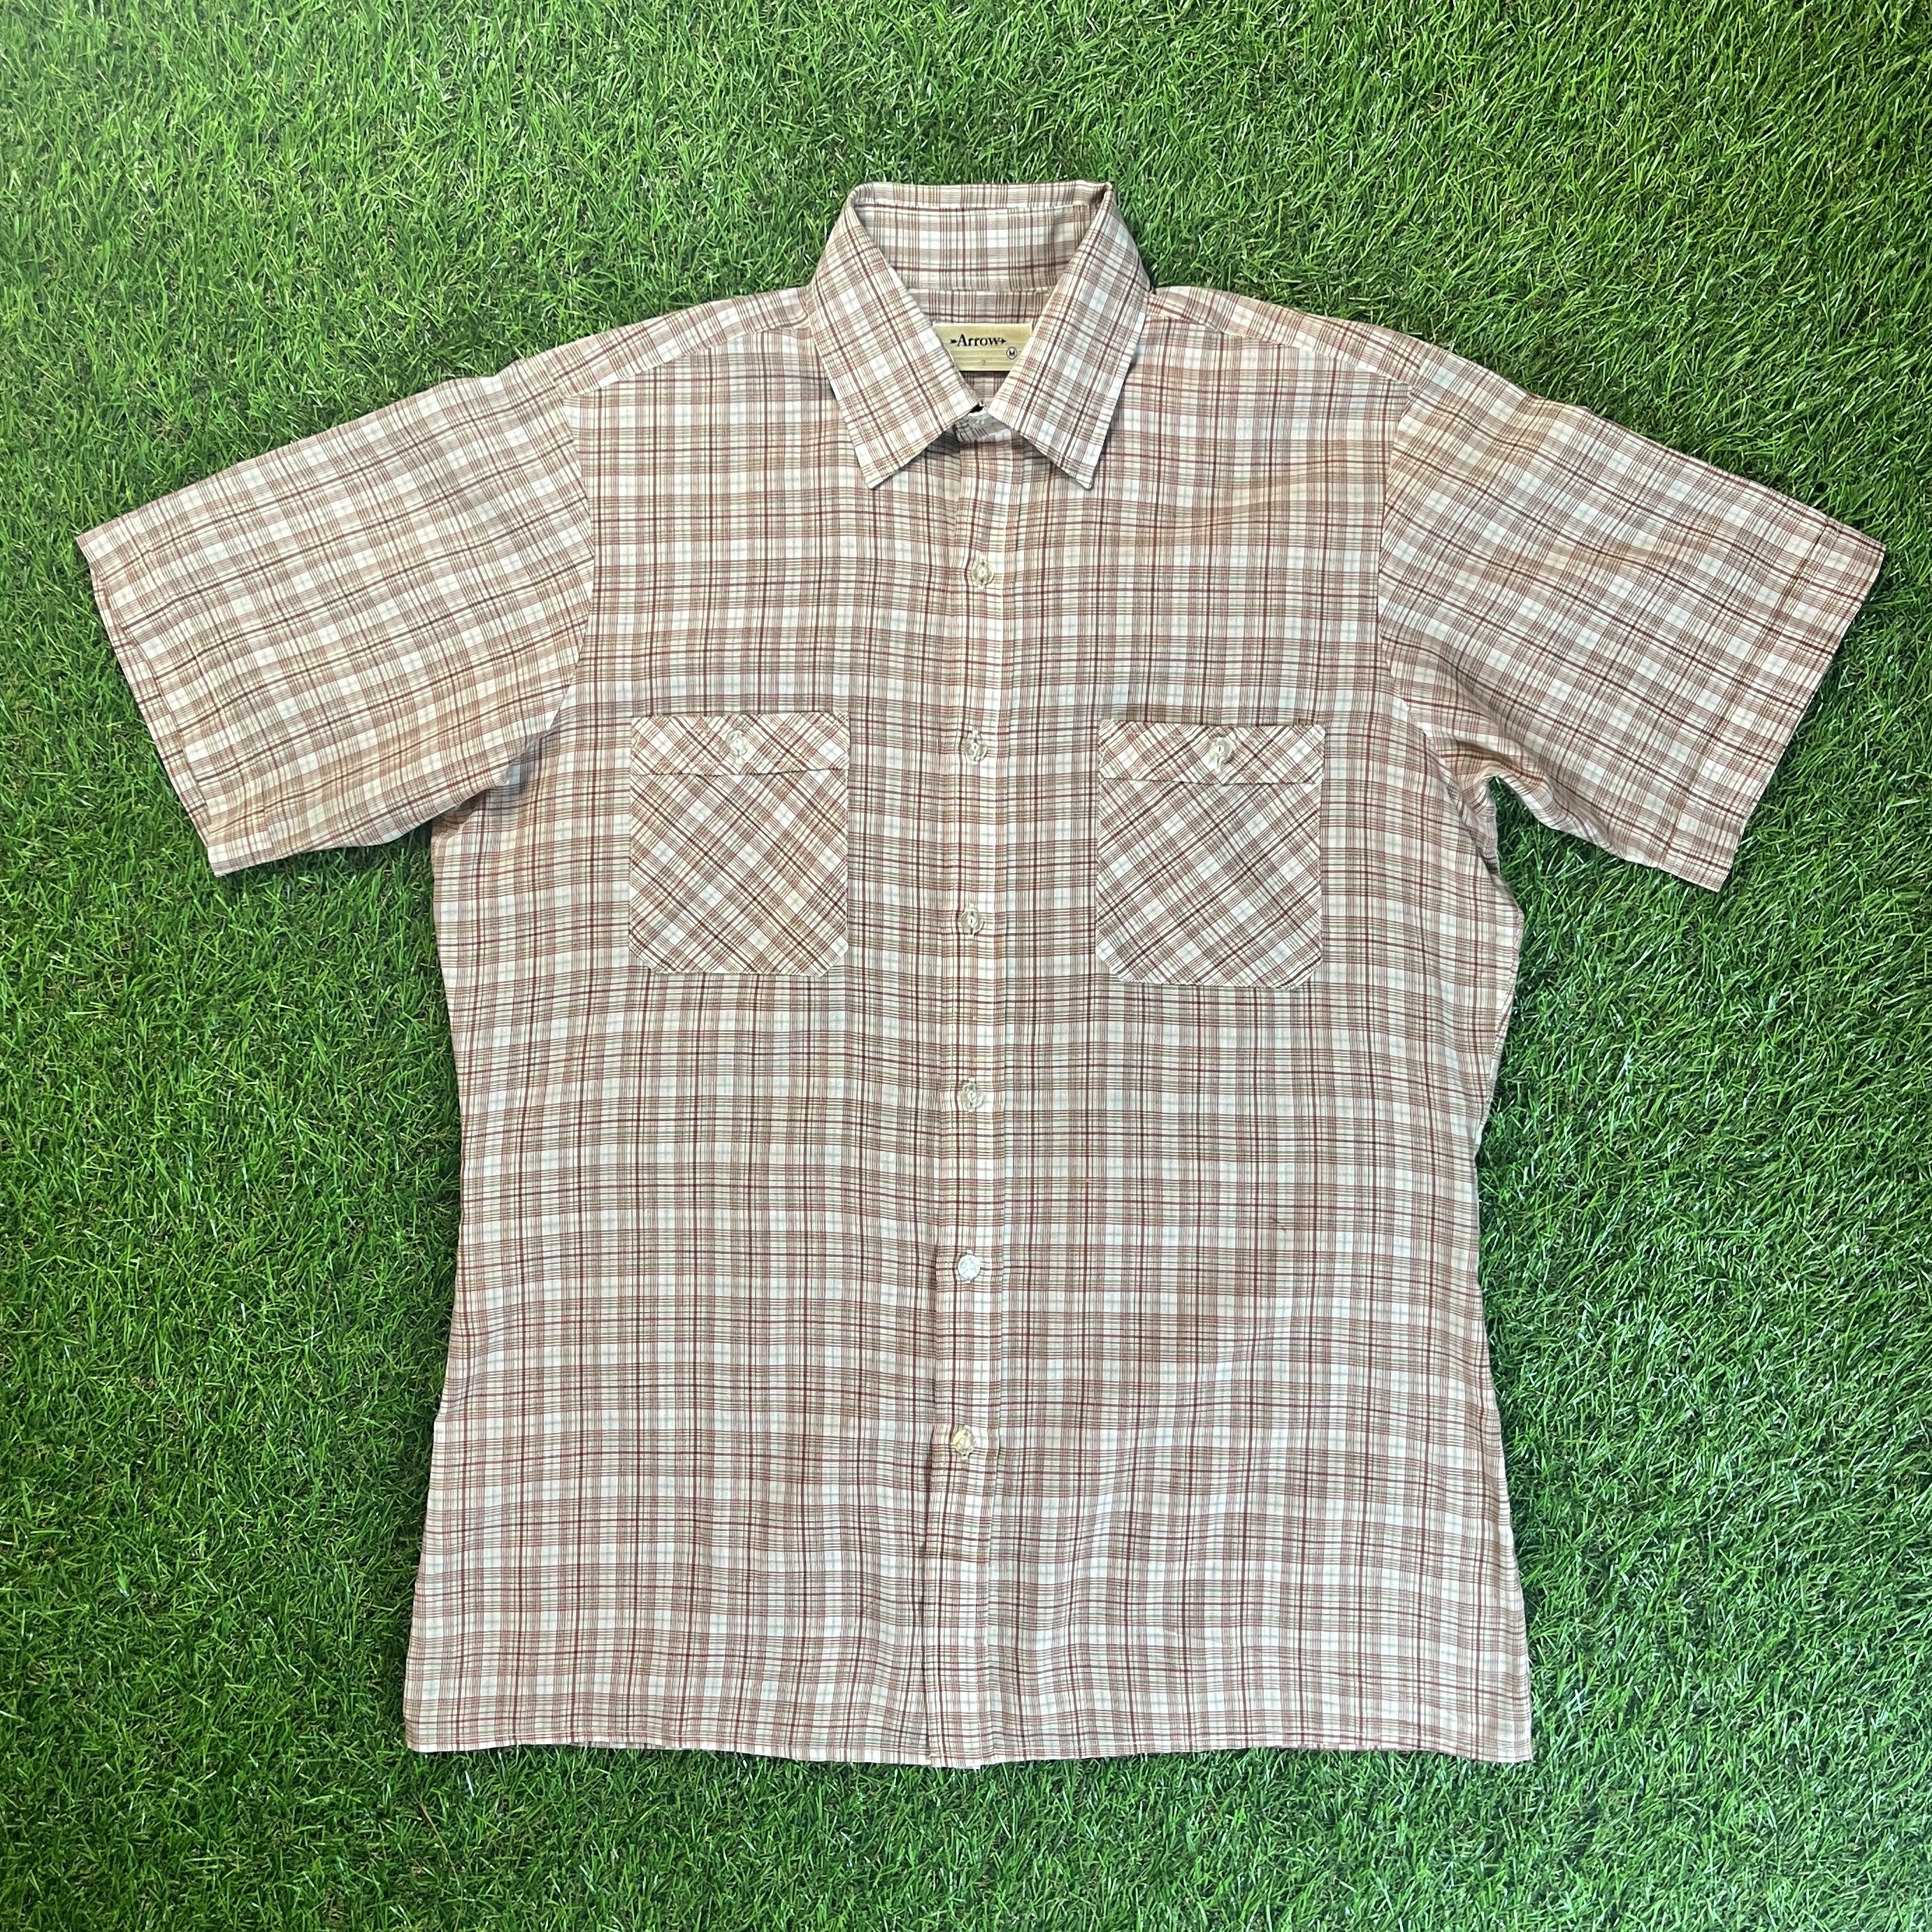 70s Arrow Checked Short Sleeve Shirt / 古着 Vintage ヴィンテージ